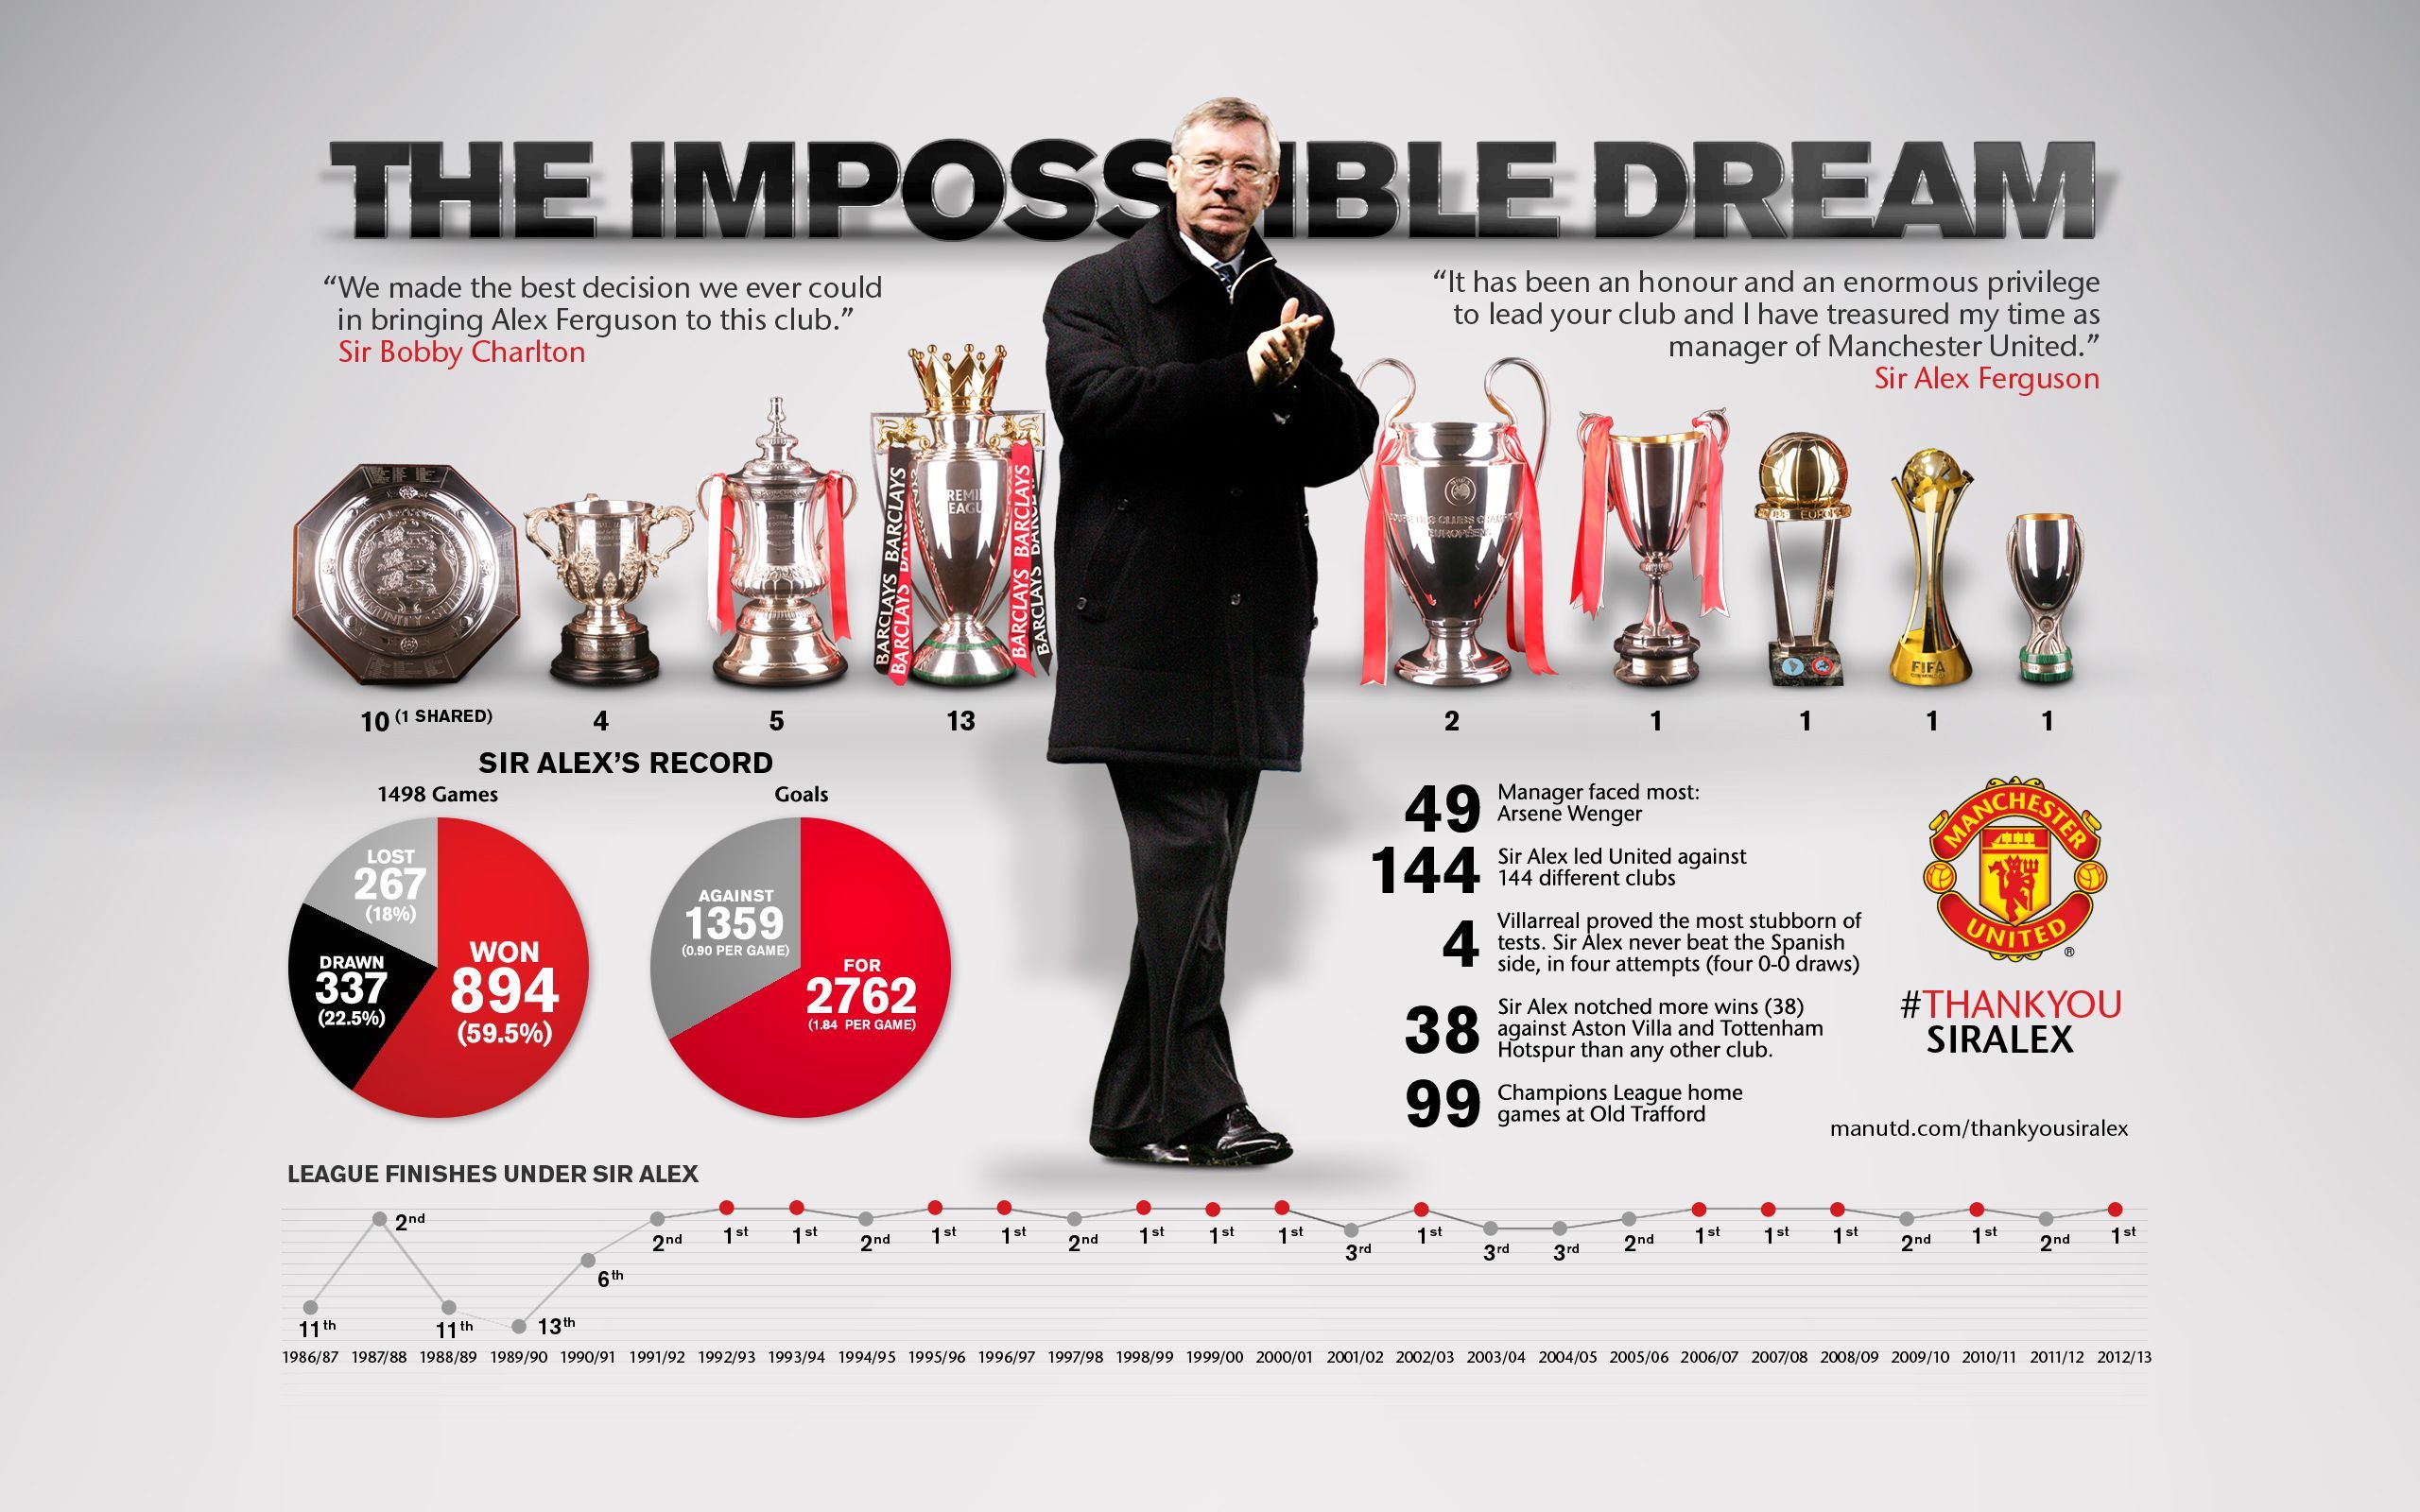 Infographic of Sir Alex Ferguson's career as manager at Manchester United